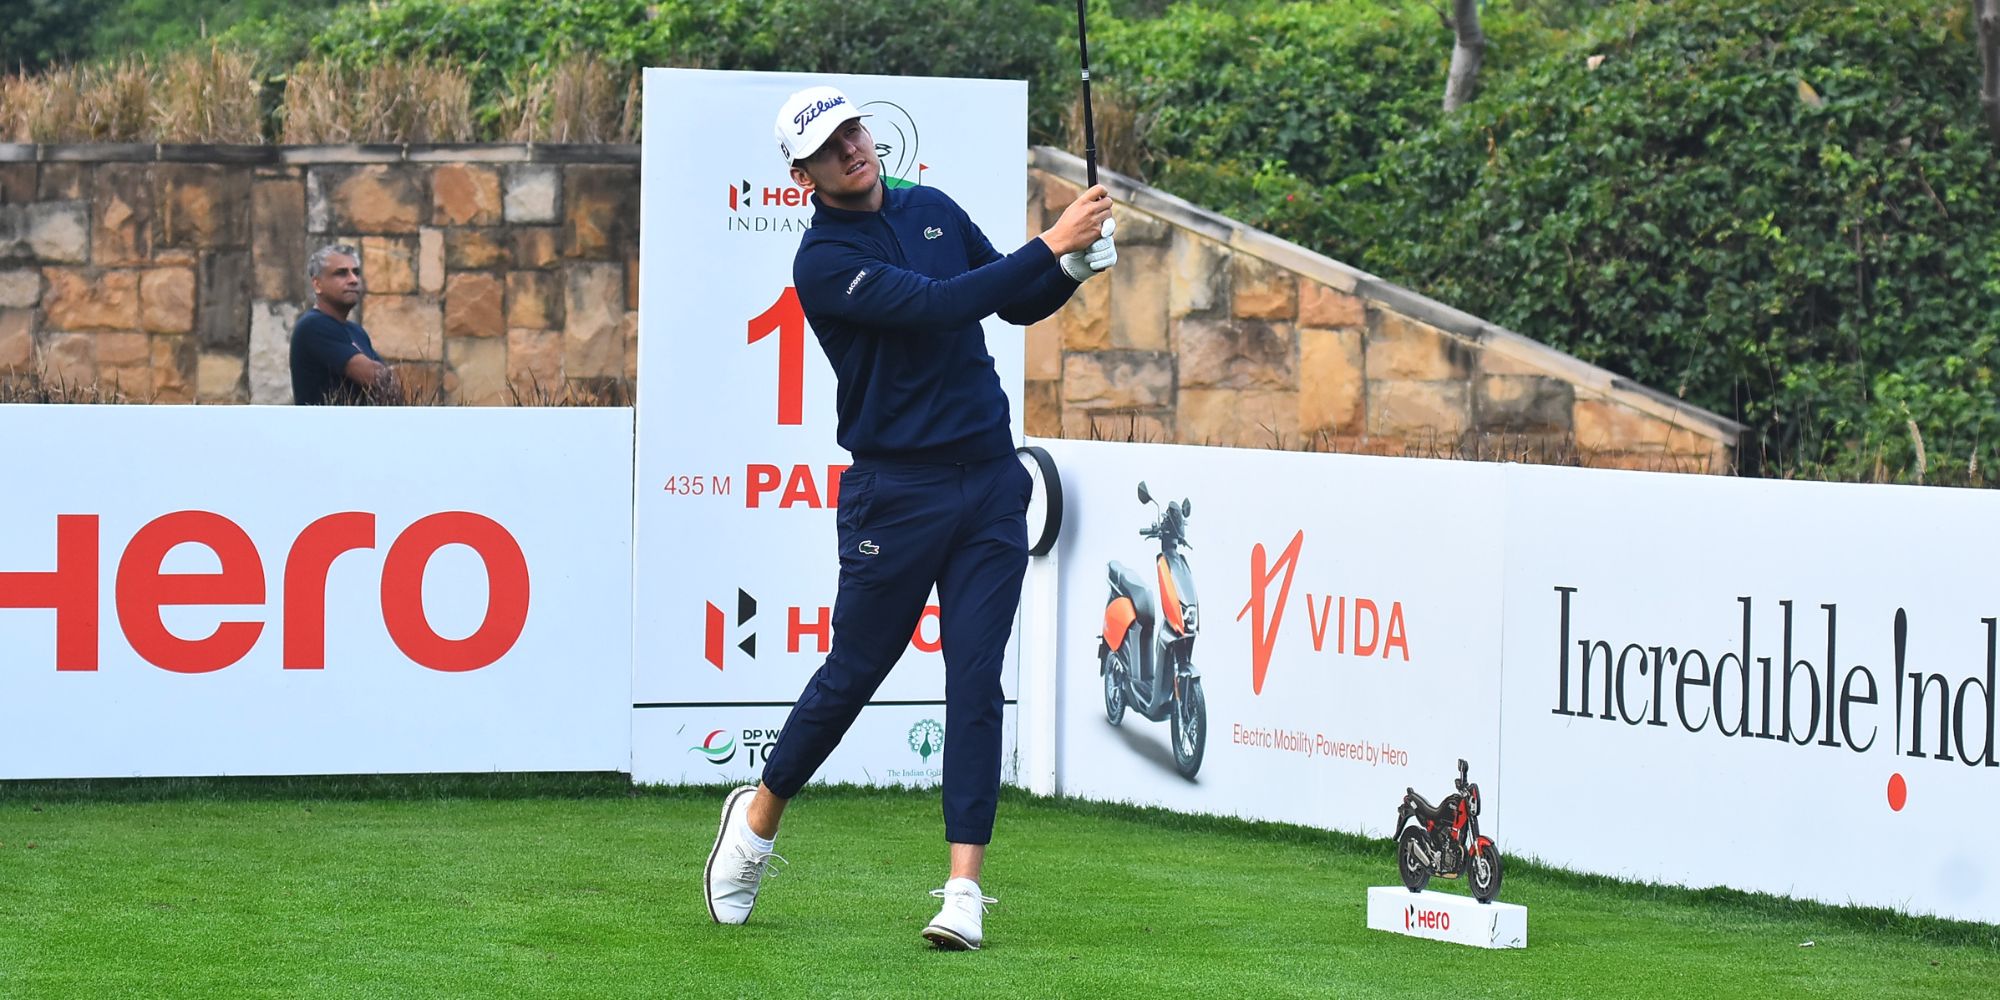 Patient and calm Paul opens 5-shot lead at halfway stage of Hero Indian Open